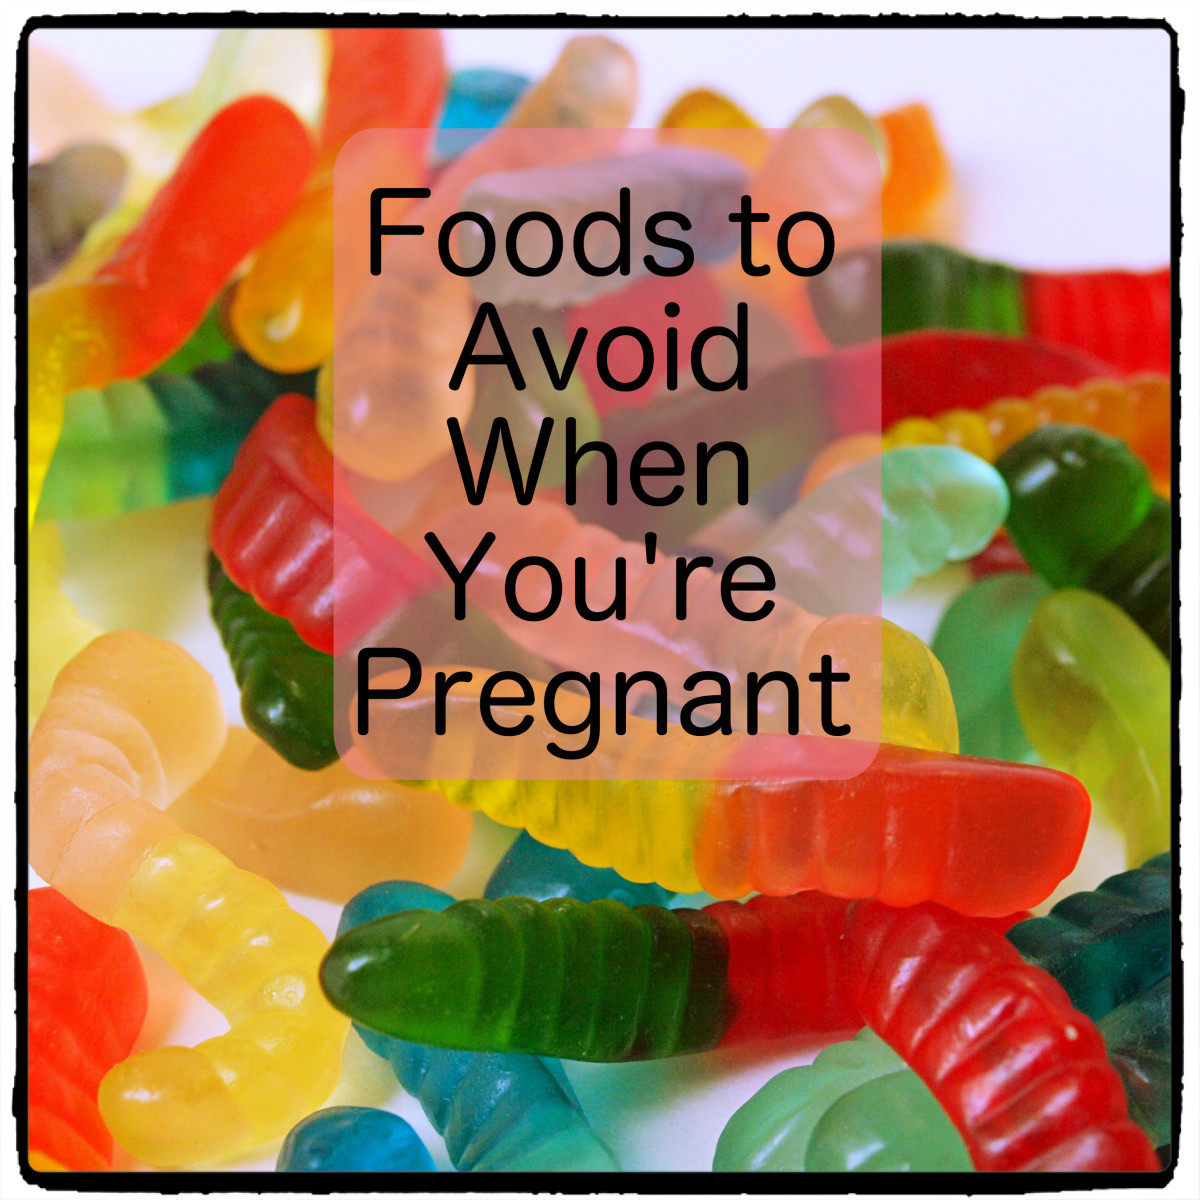 Foods to avoid when you're pregnant.